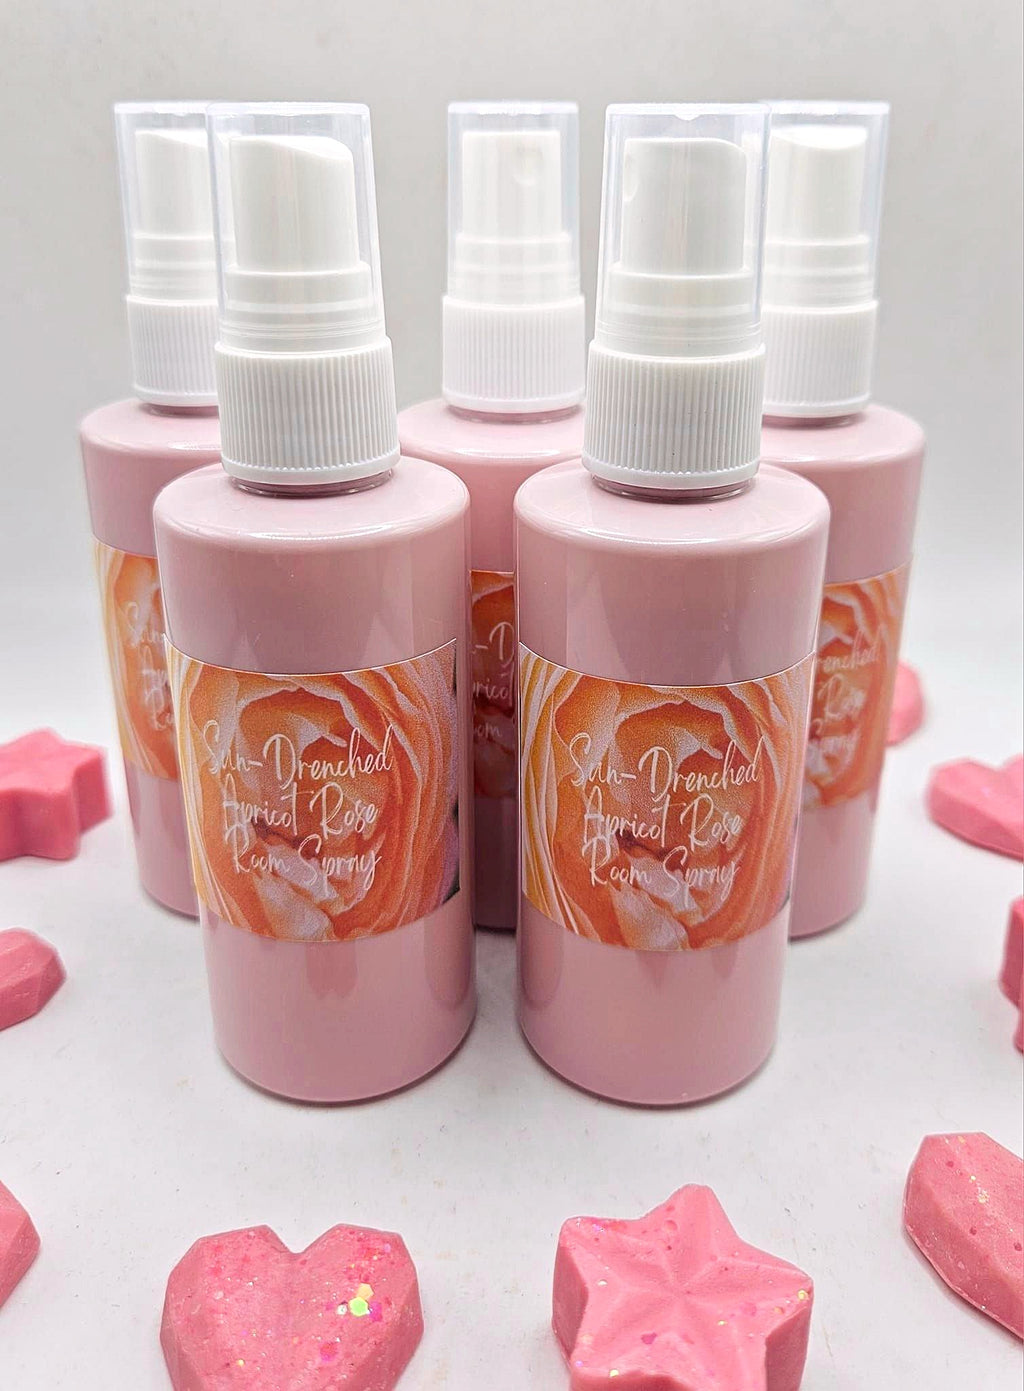 Sun-Drenched Apricot Rose Room Spray